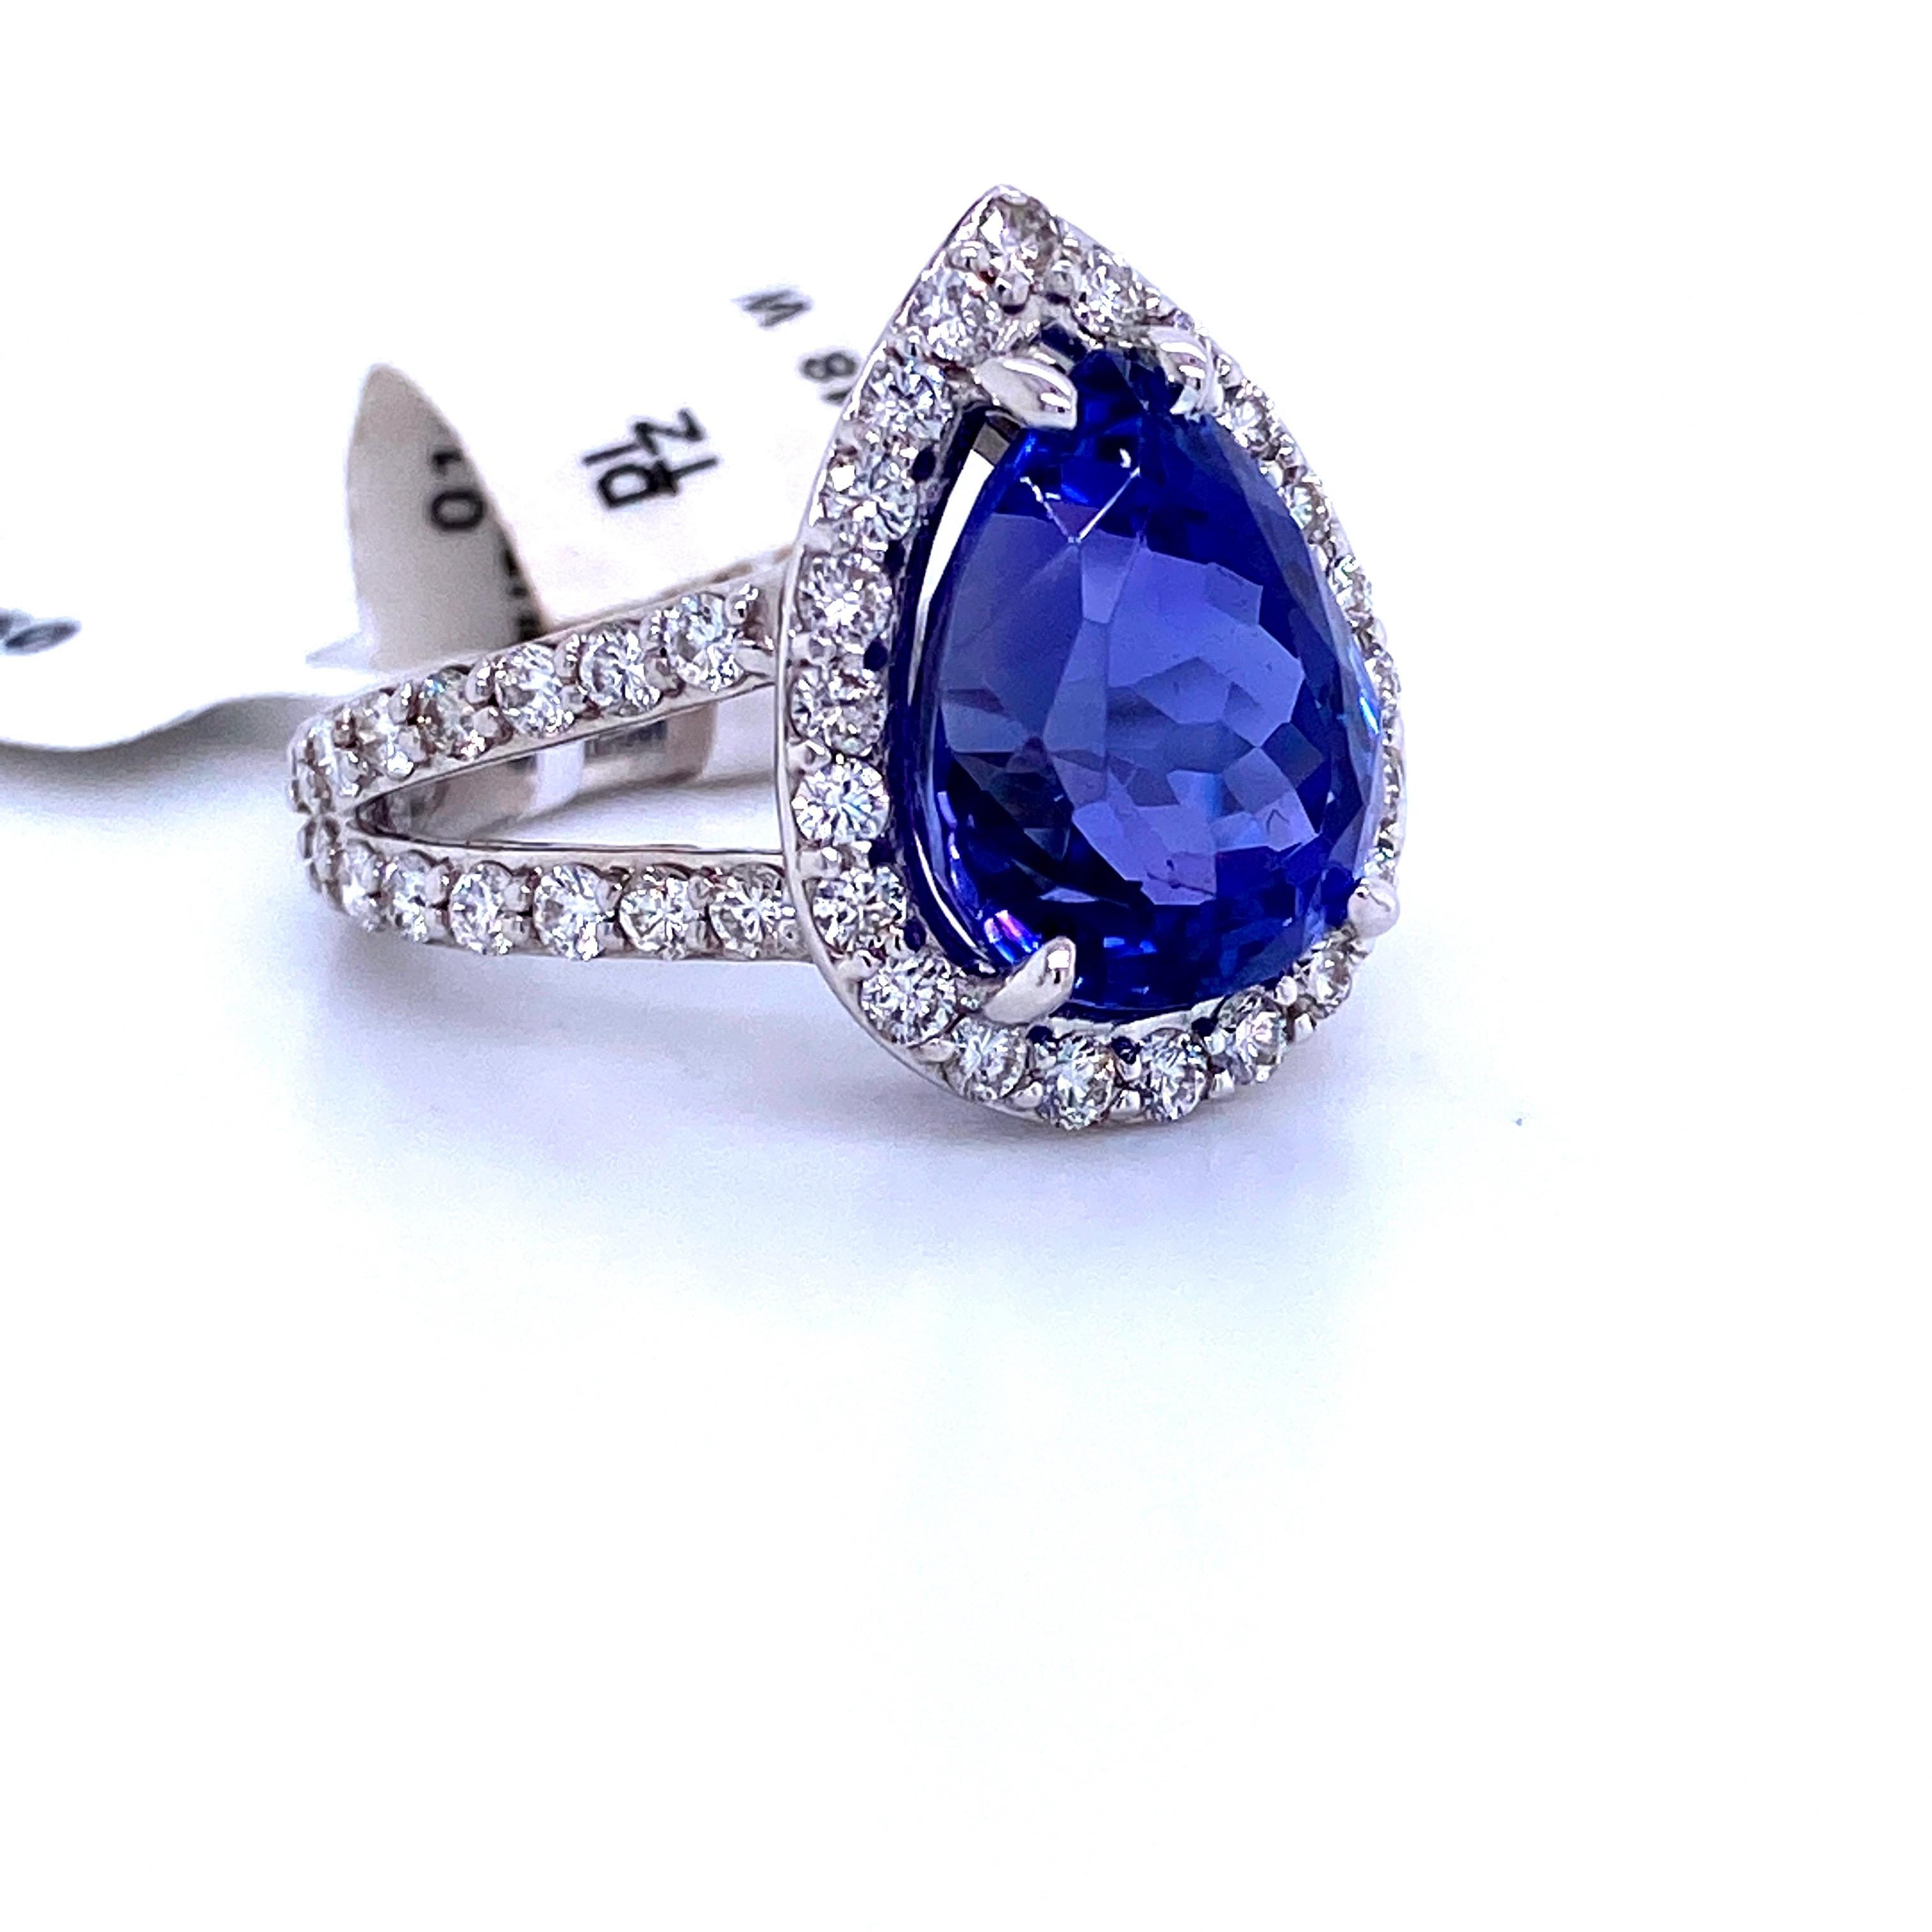 18K White gold cocktail ring featuring one pear shape Tanzanite weighing 8.32 carats flanked with a diamond halo and split shank mounting weighing 1.50 carats.
Color G-H
Clarity SI